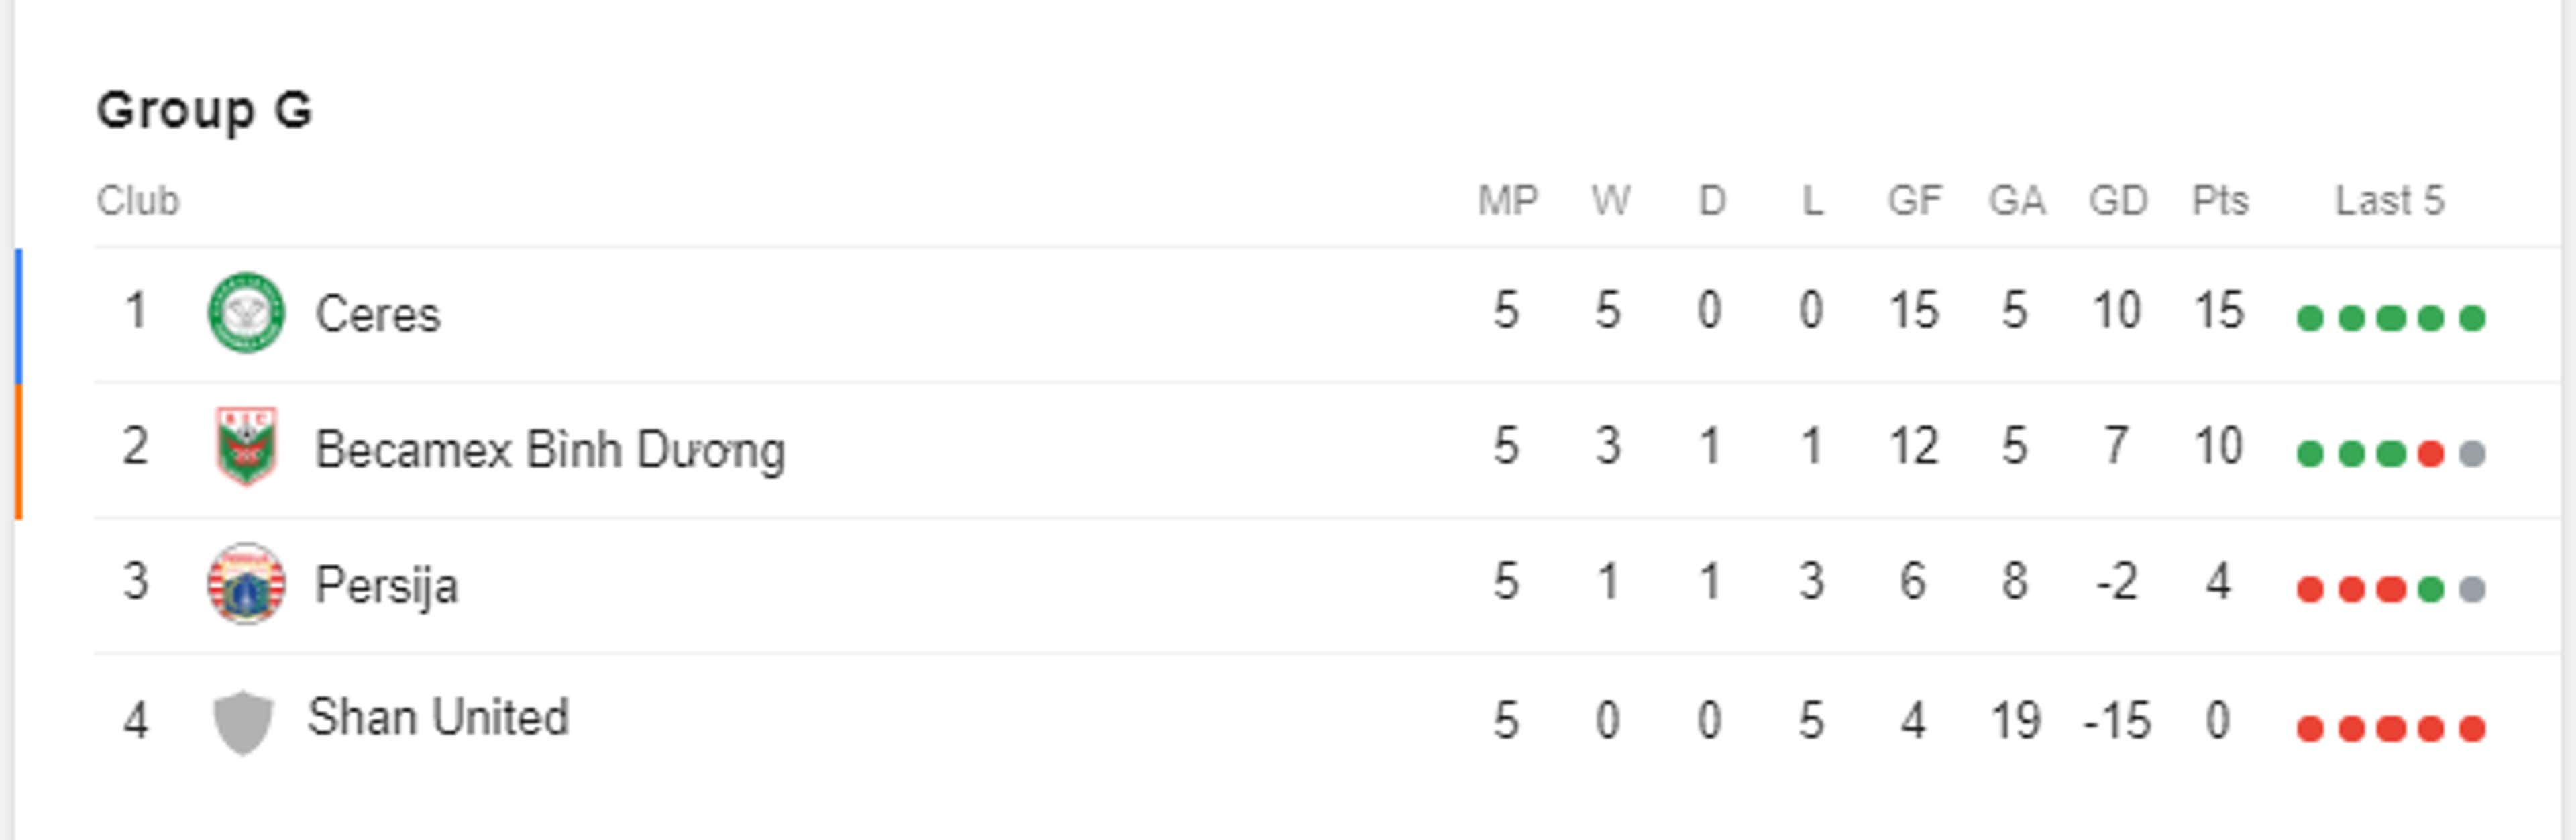 AFC Cup table Group G 02052019